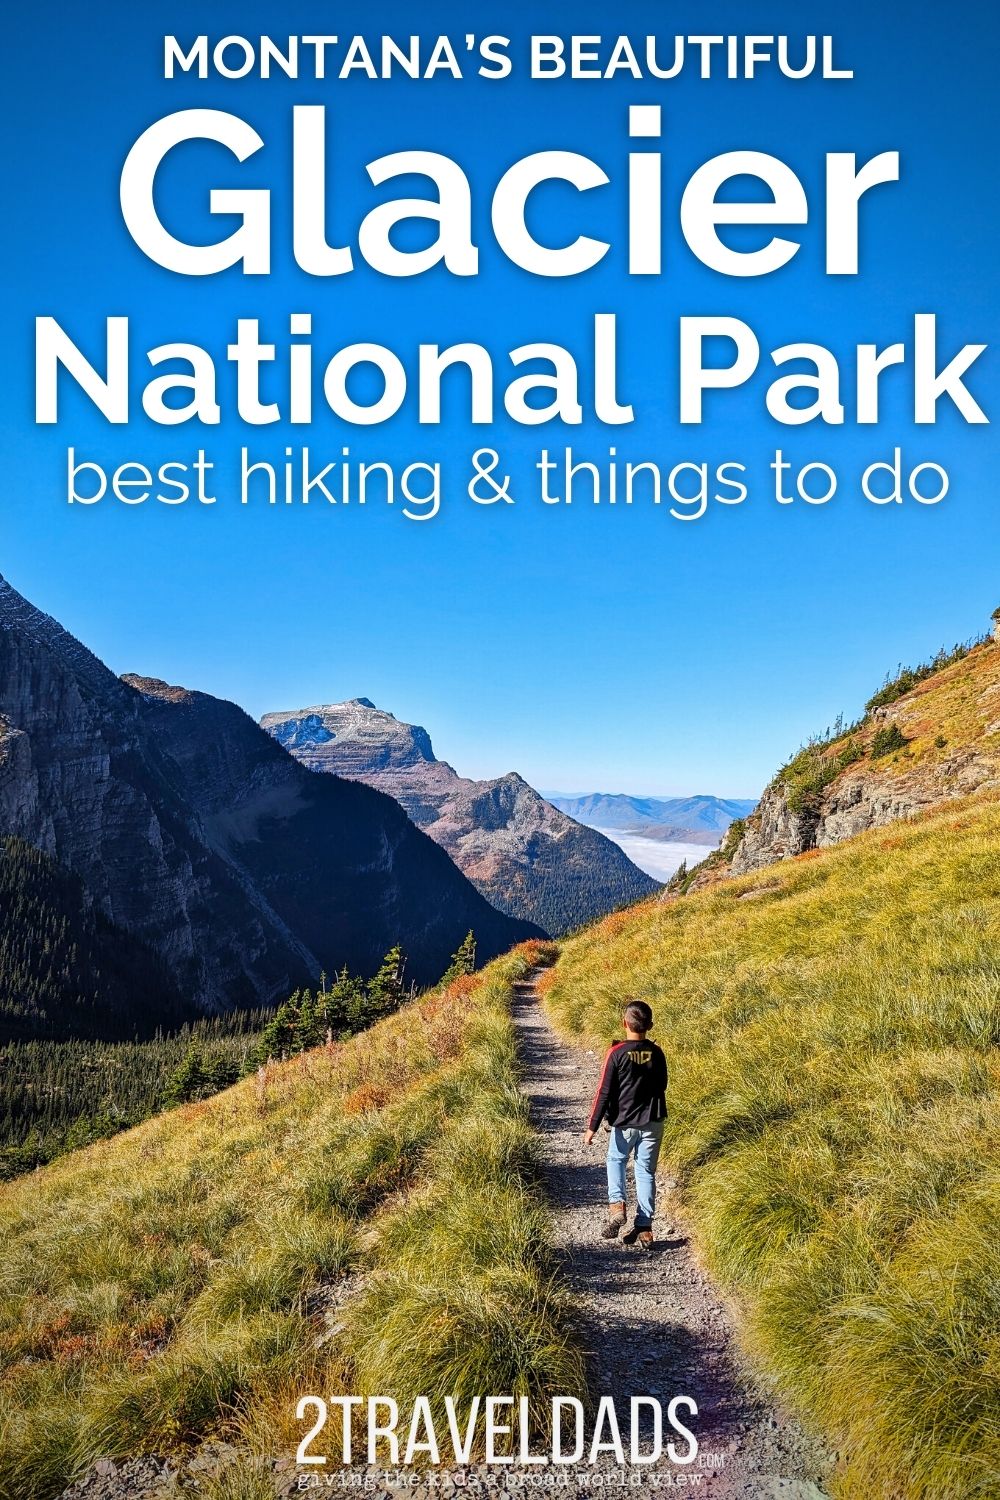 Having visited Glacier National Park in Montana so many time, we know the best hikes, great trails with kids, and most fun things to do in the park. This guide is ideal for planning a family or solo trip to Glacier NP!